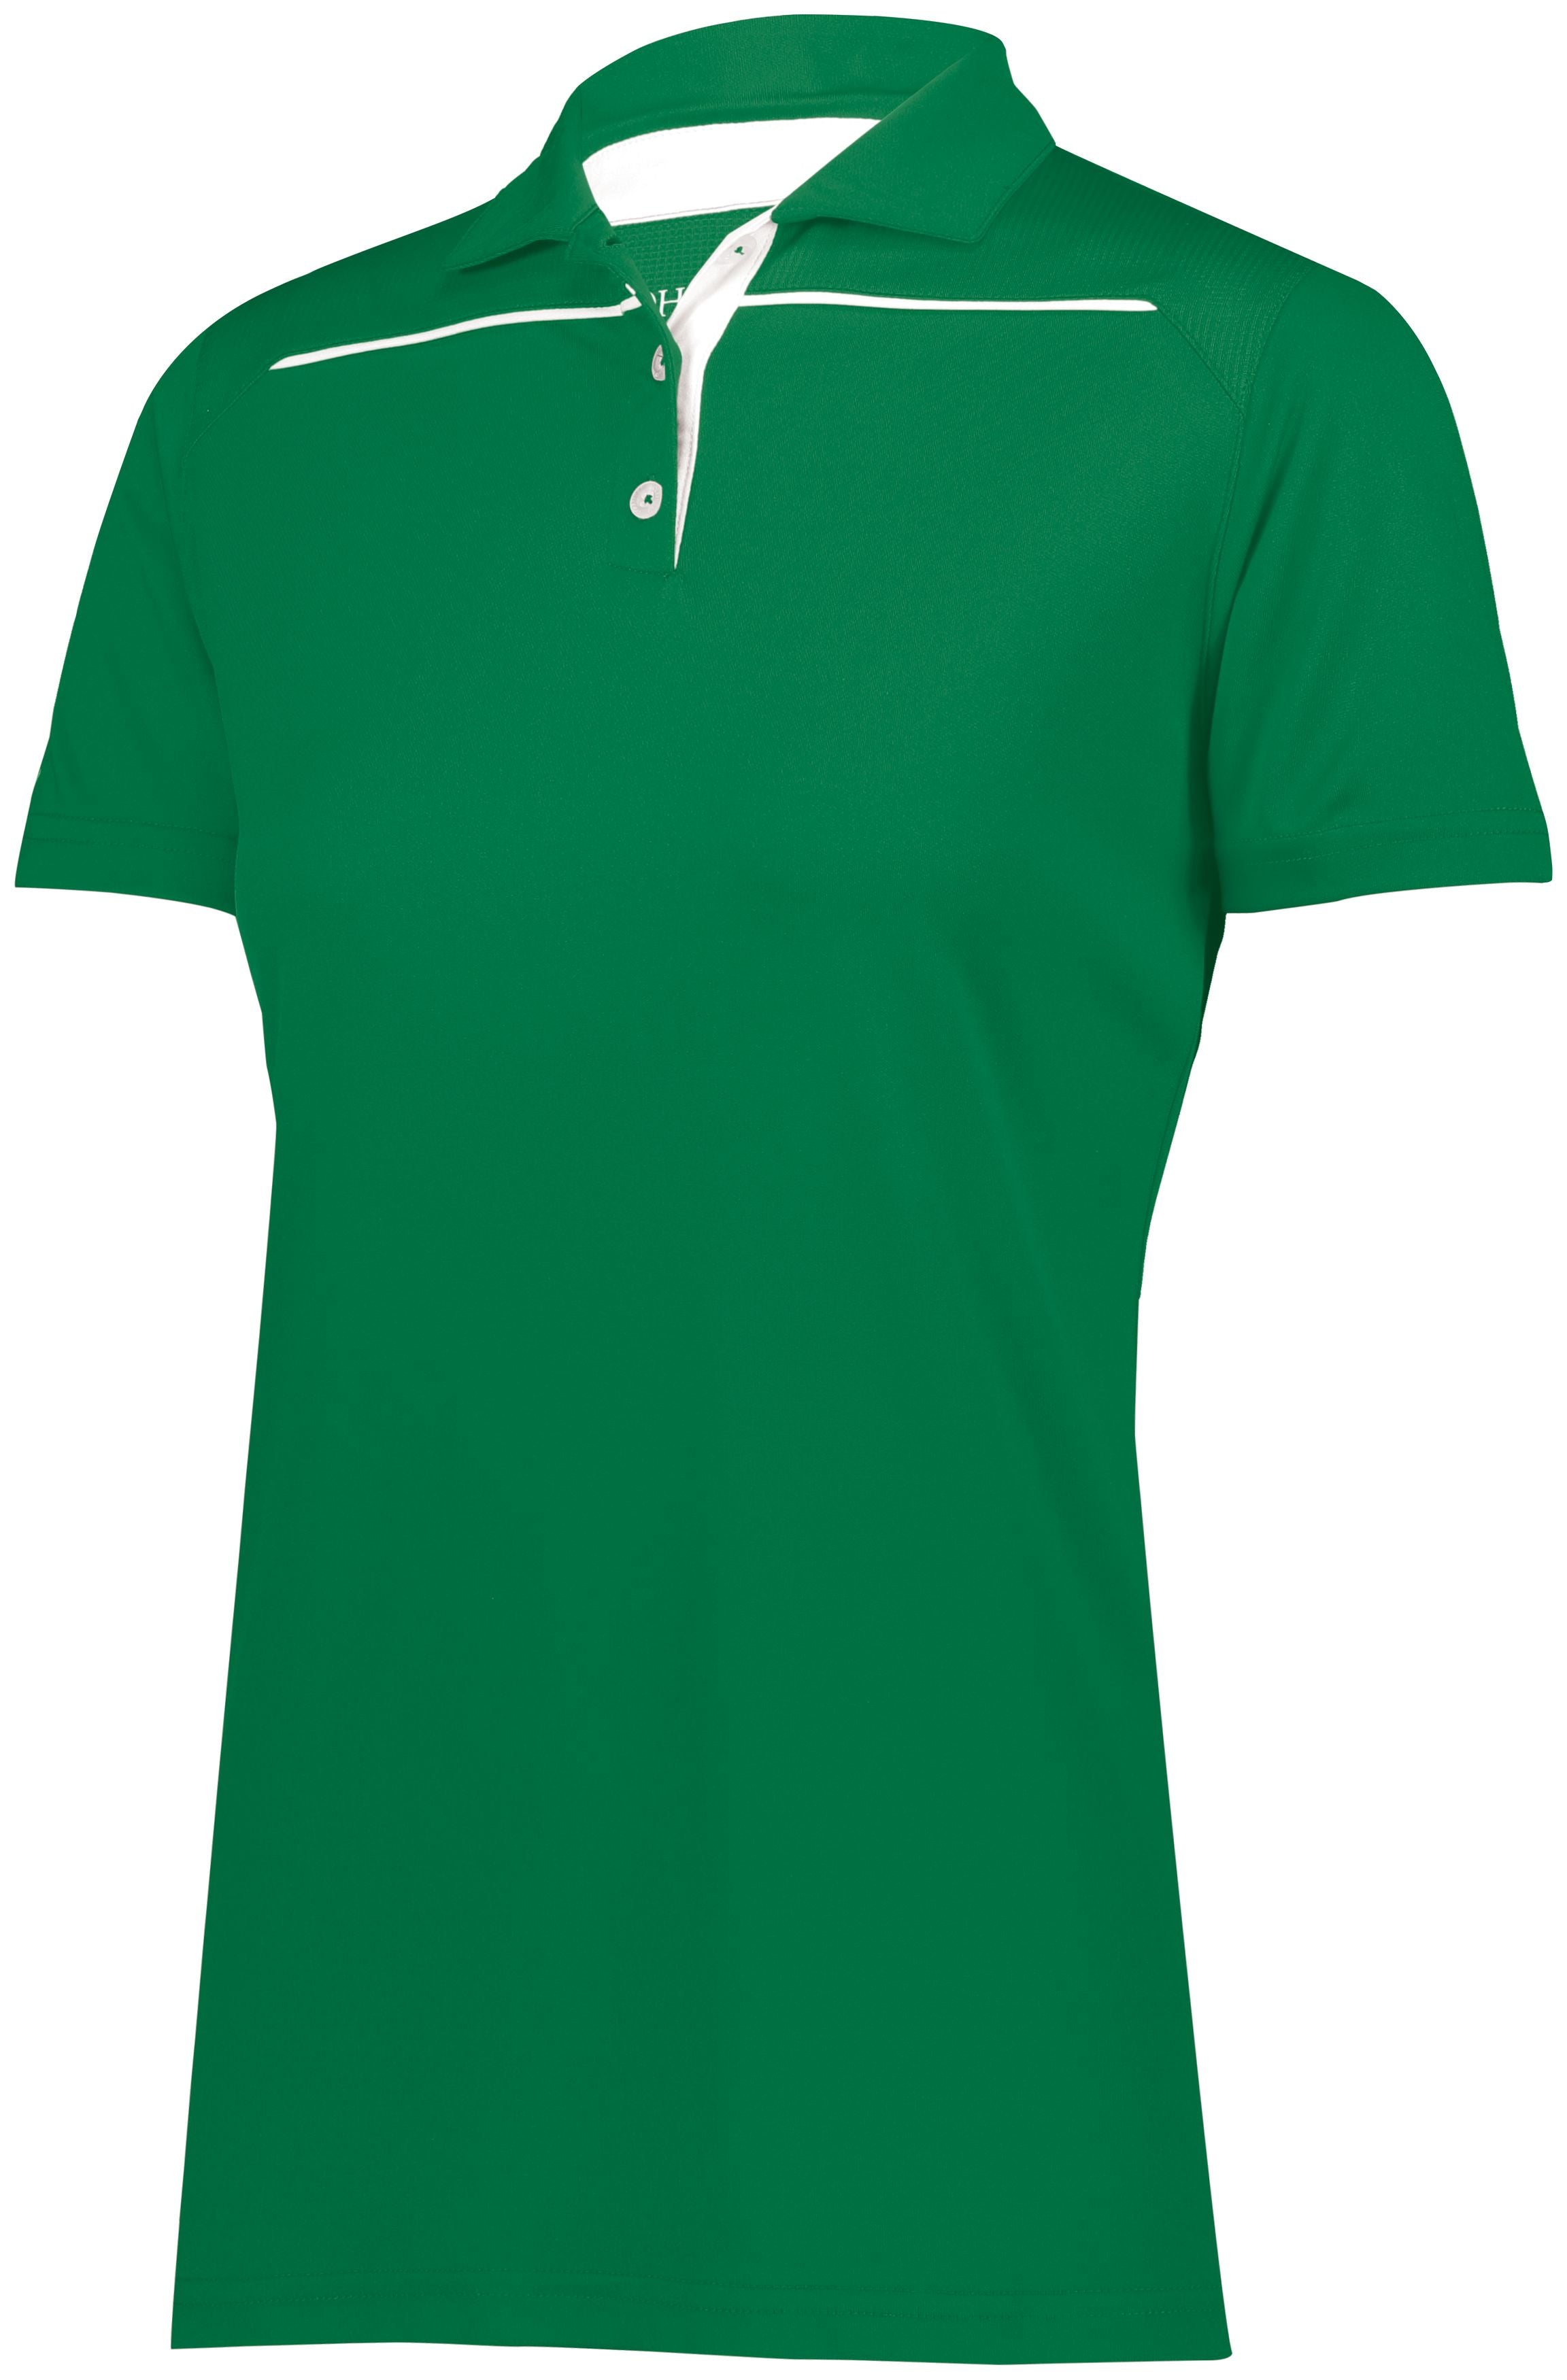 Holloway Ladies Defer Polo in Kelly/White  -Part of the Ladies, Ladies-Polo, Polos, Holloway, Shirts product lines at KanaleyCreations.com